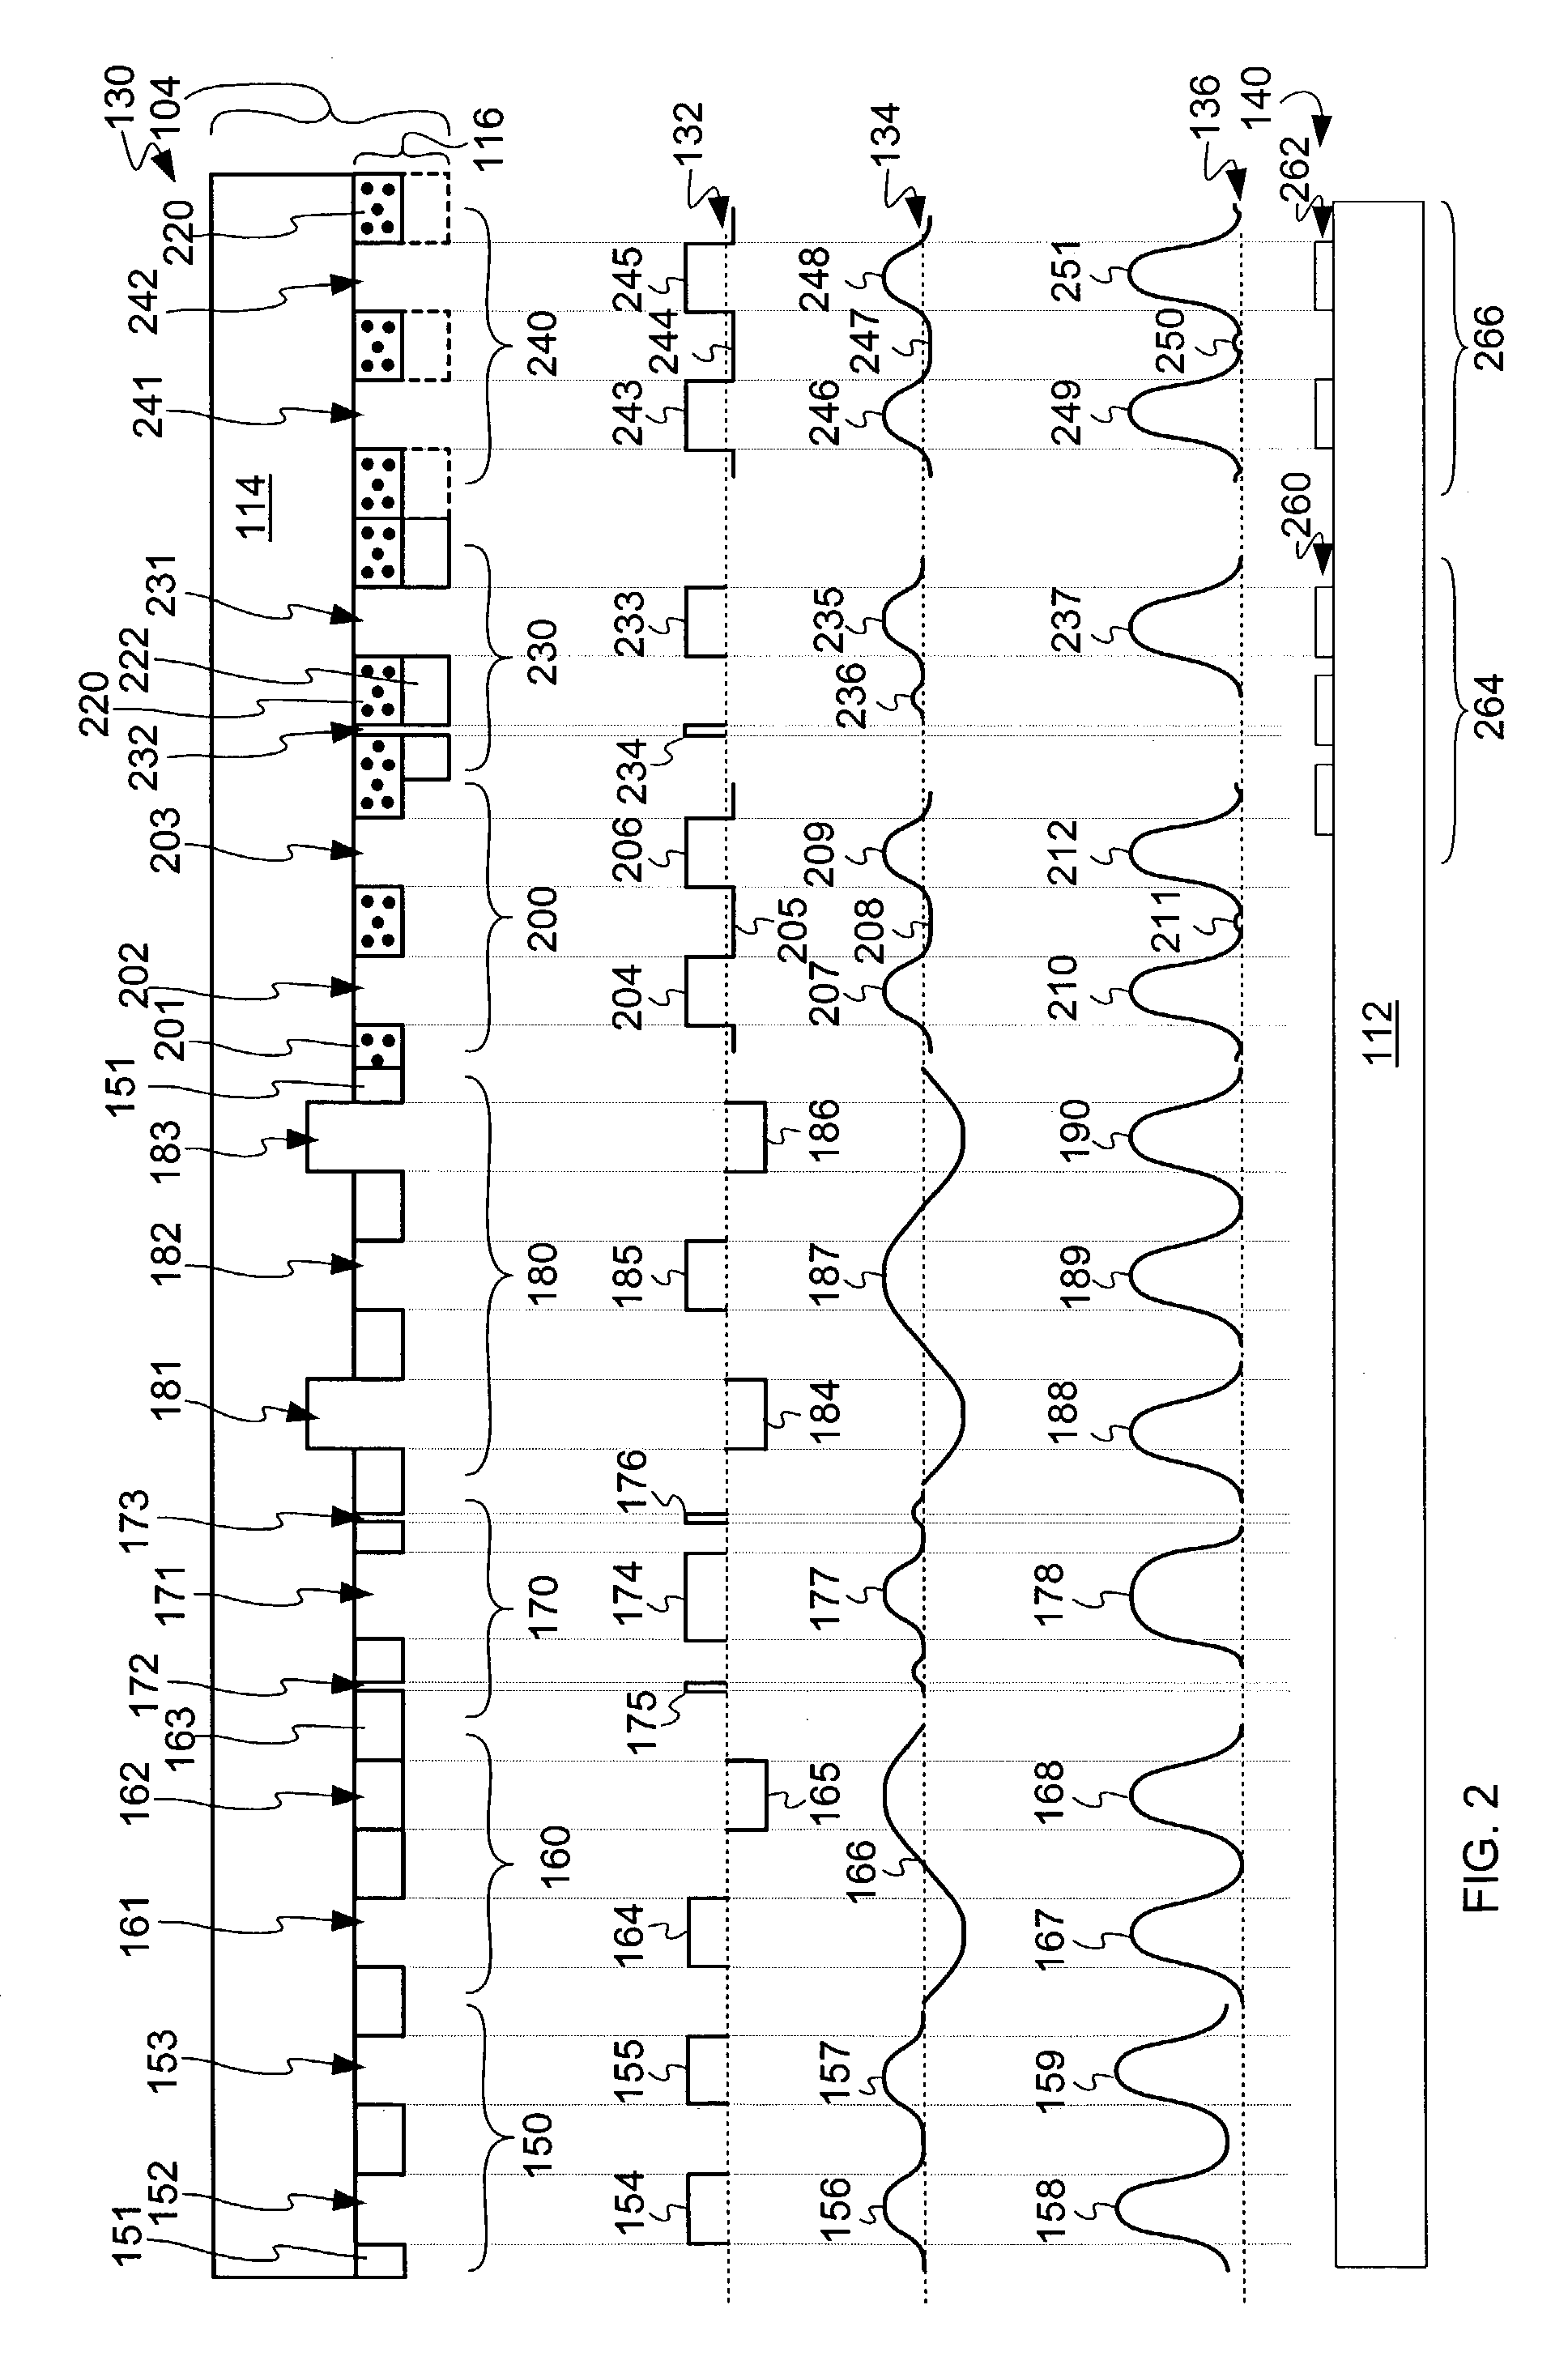 Semiconductor manufacturing resolution enhancement system and method for simultaneously patterning different feature types